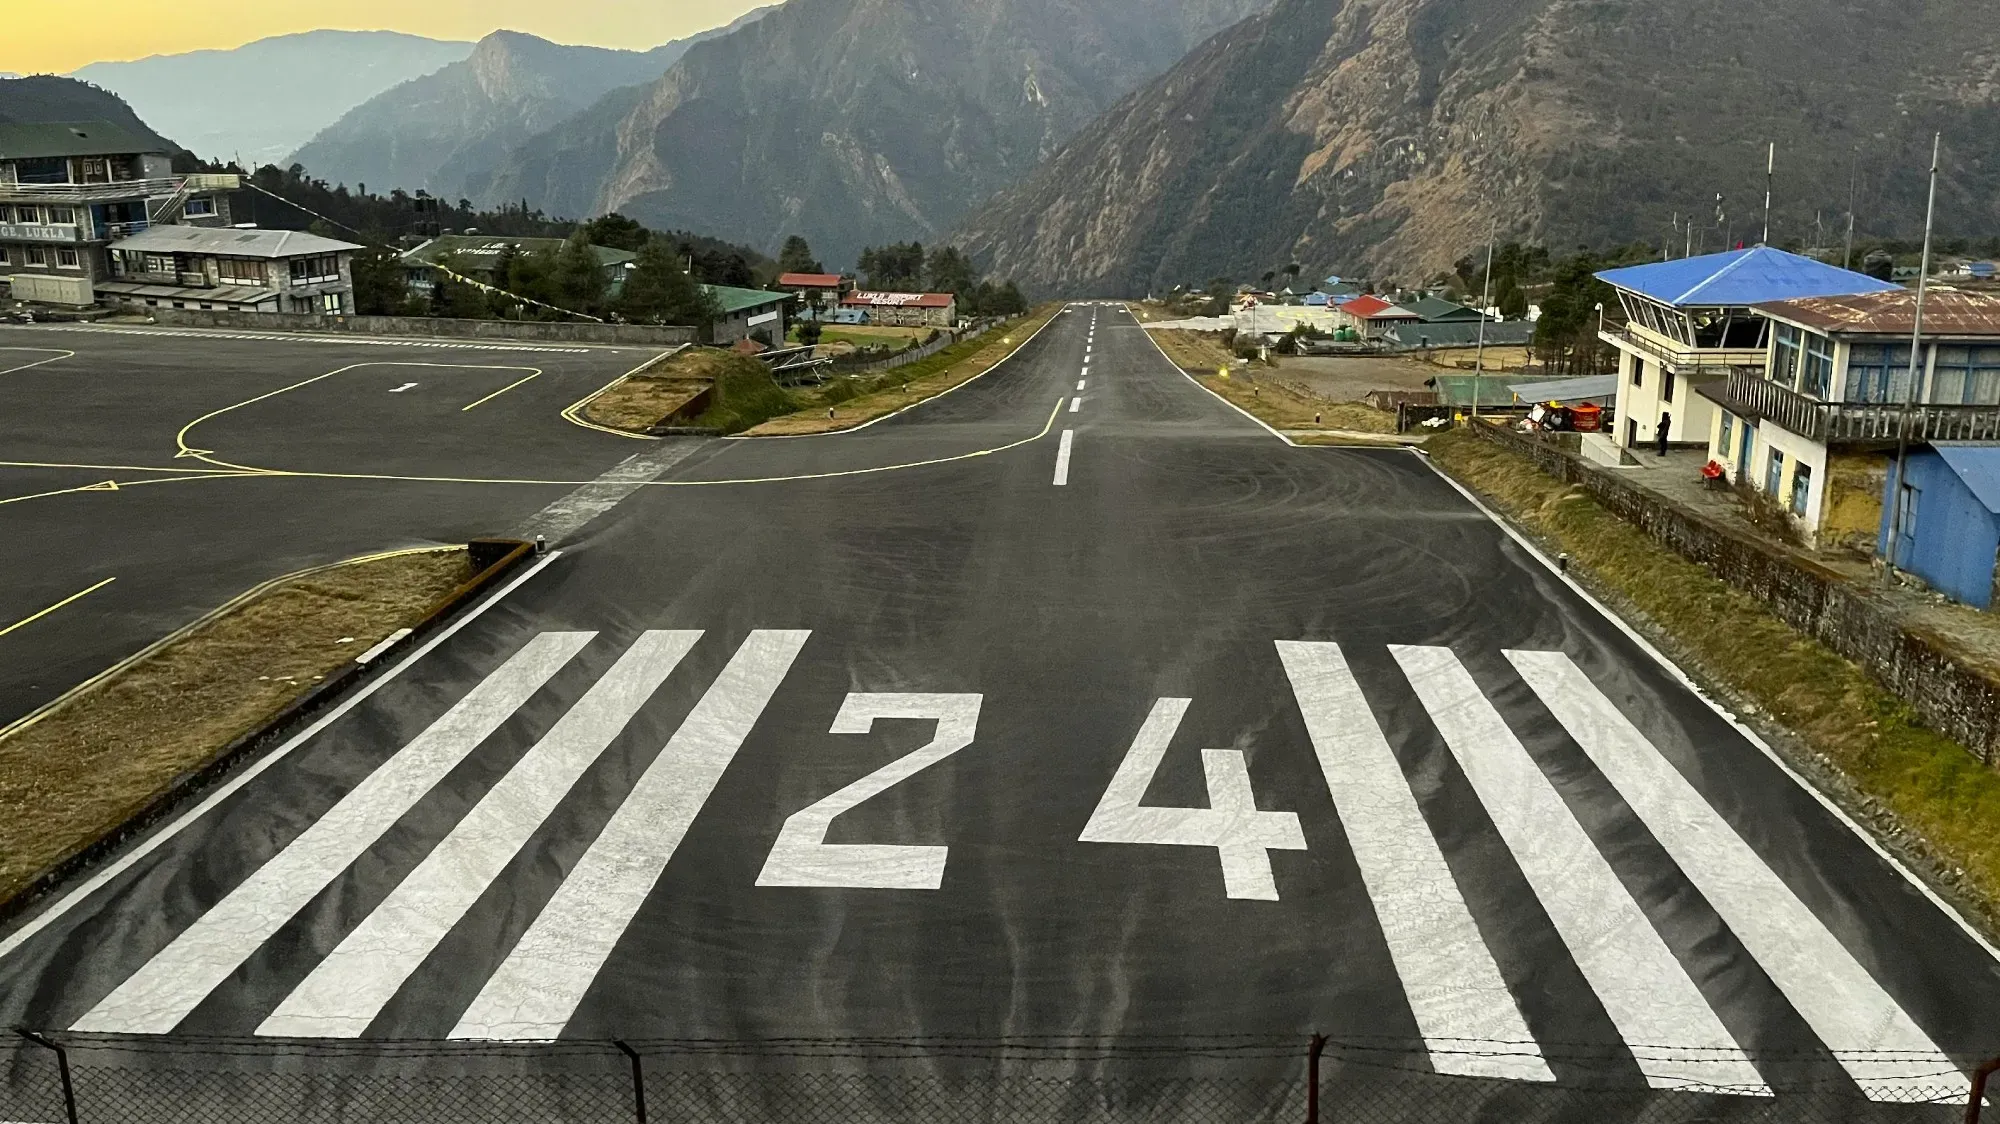 Looking down the Lukla Airport runway off into the valley